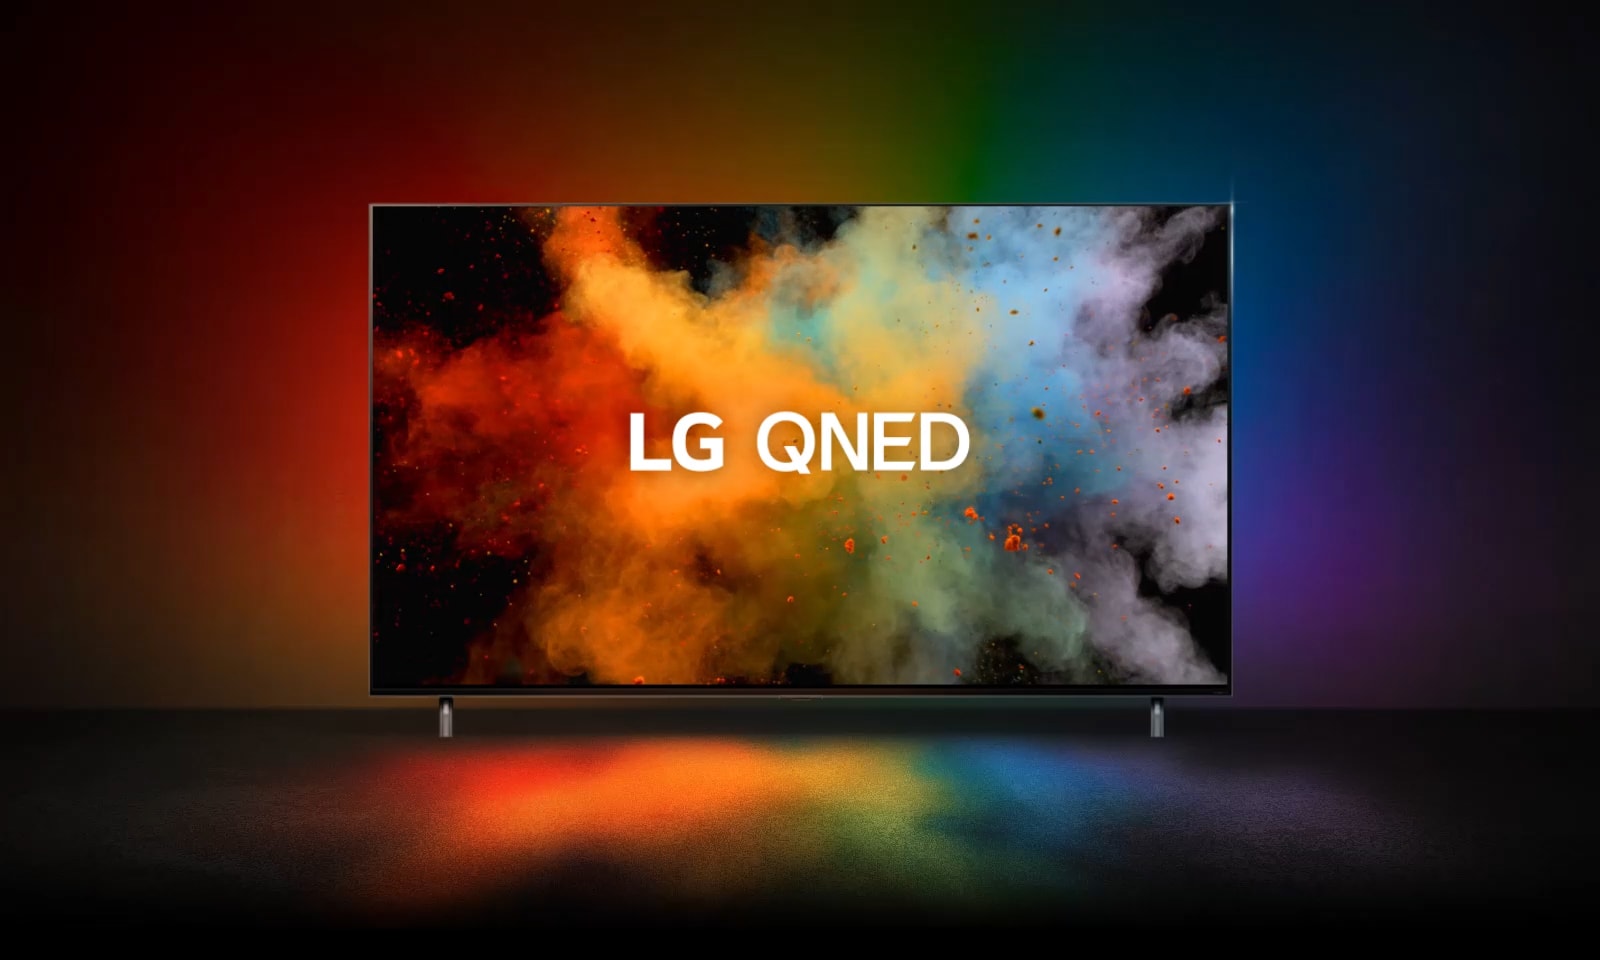 Typo-motion of QNED and NanoCell overlap and explode into color powder. LG QNED 8K miniLED logo appears on TV.